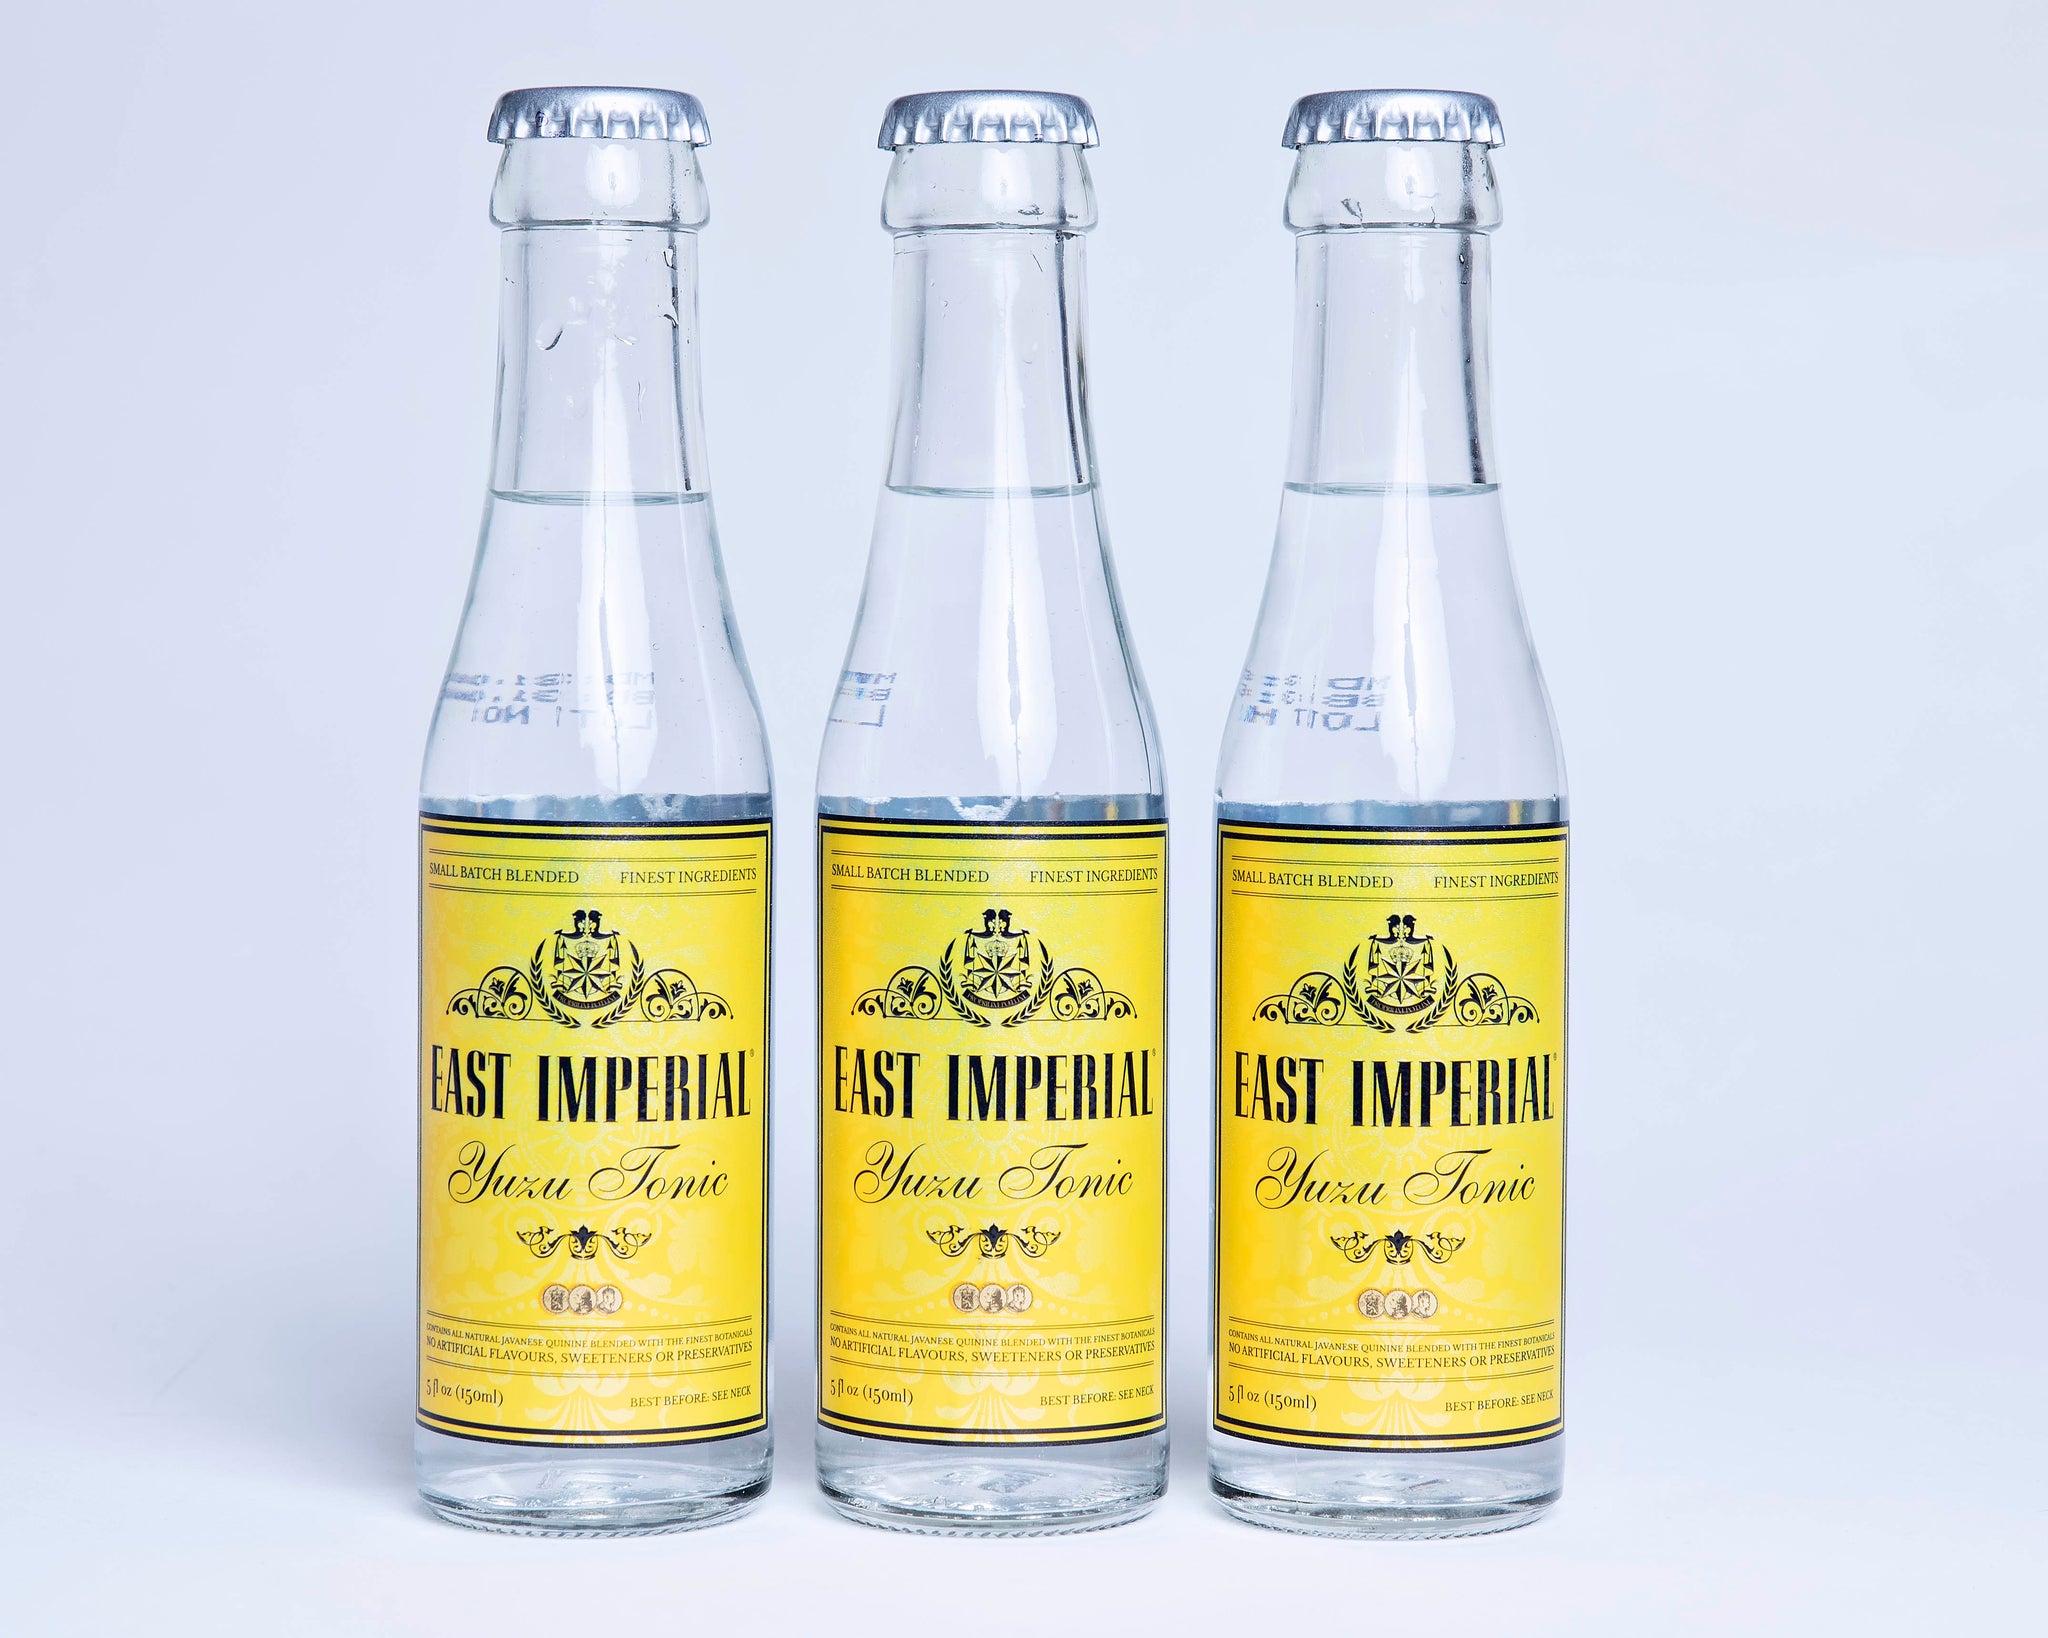 East Imperial Yuza Tonic